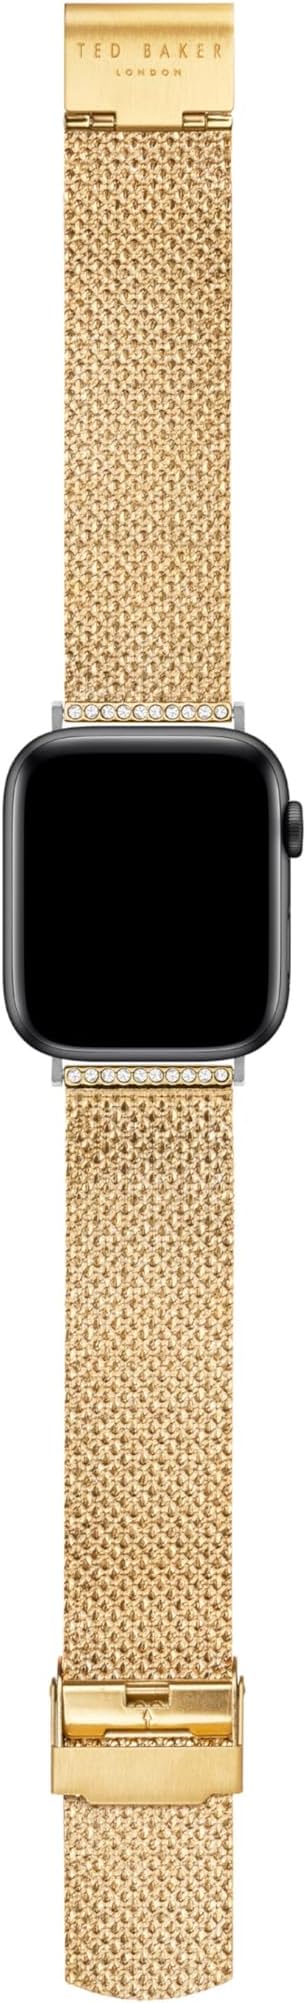 Ted Baker Strap for Apple Watch - BKS38S316